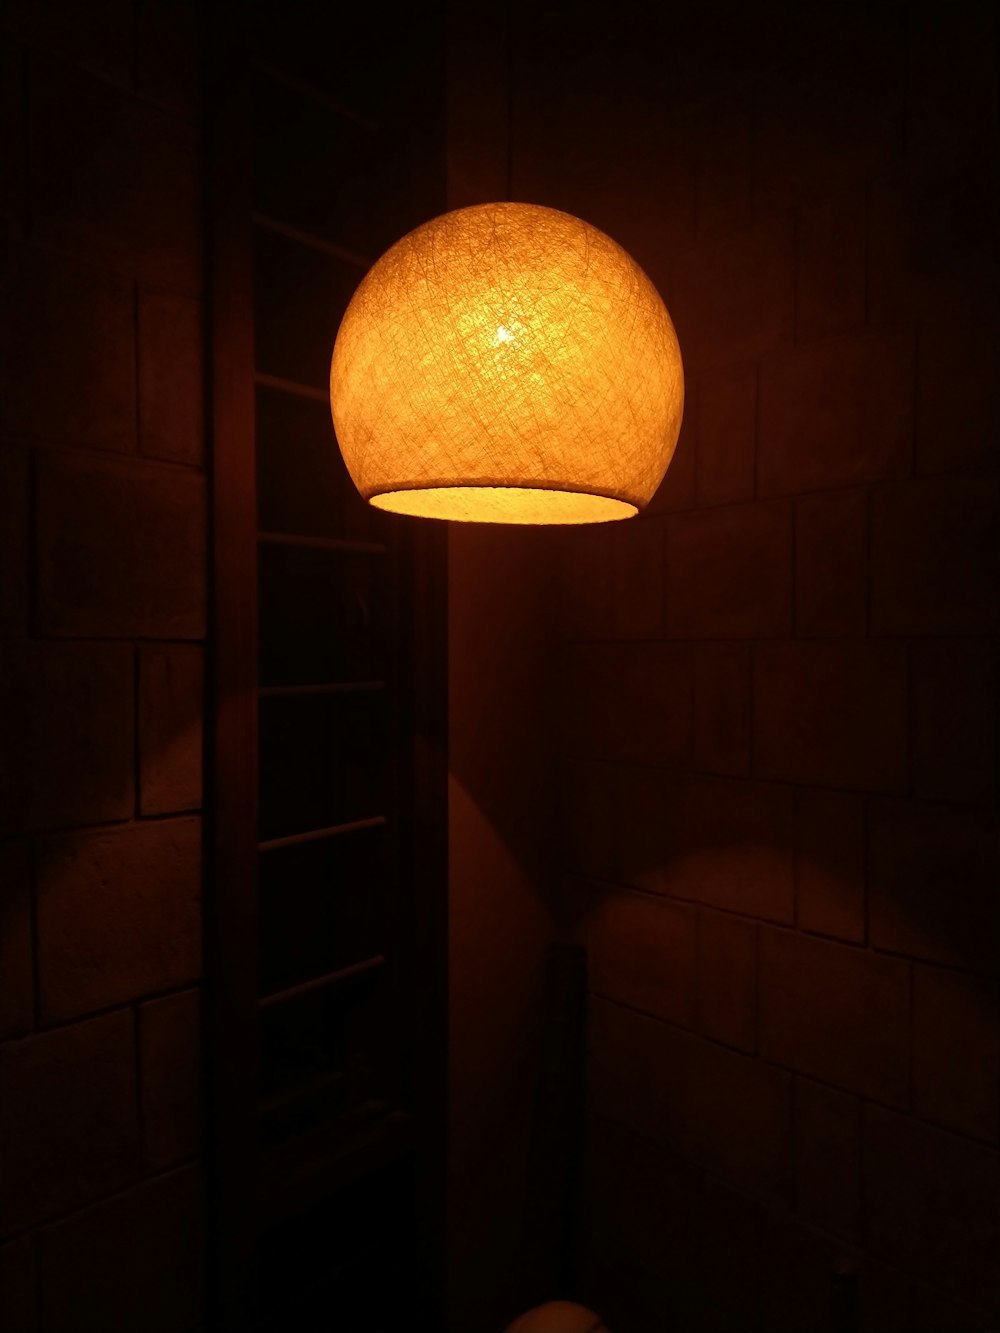 Turned On Pendant Lamp At The Corner Of The House Photo Free